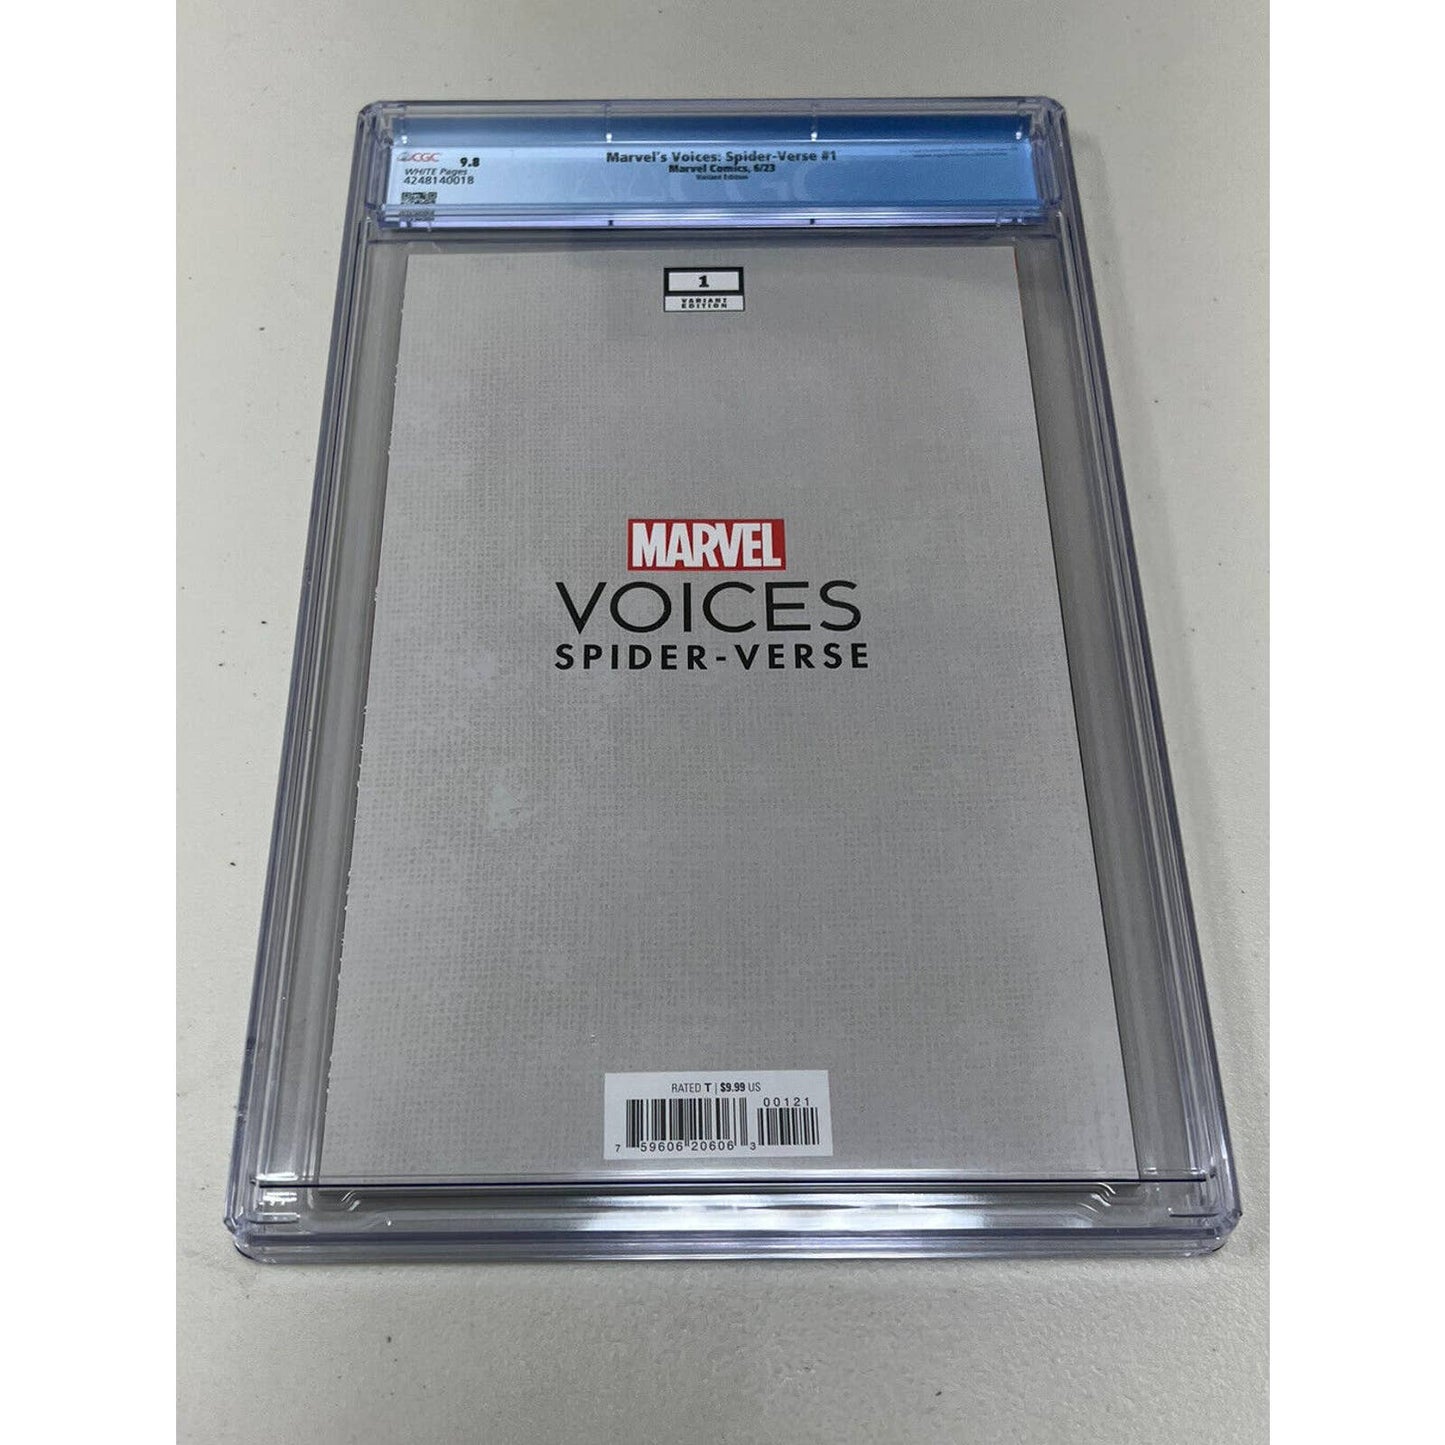 Marvels Voices Spider-Verse #1 9.8 CGC John Giang Variant